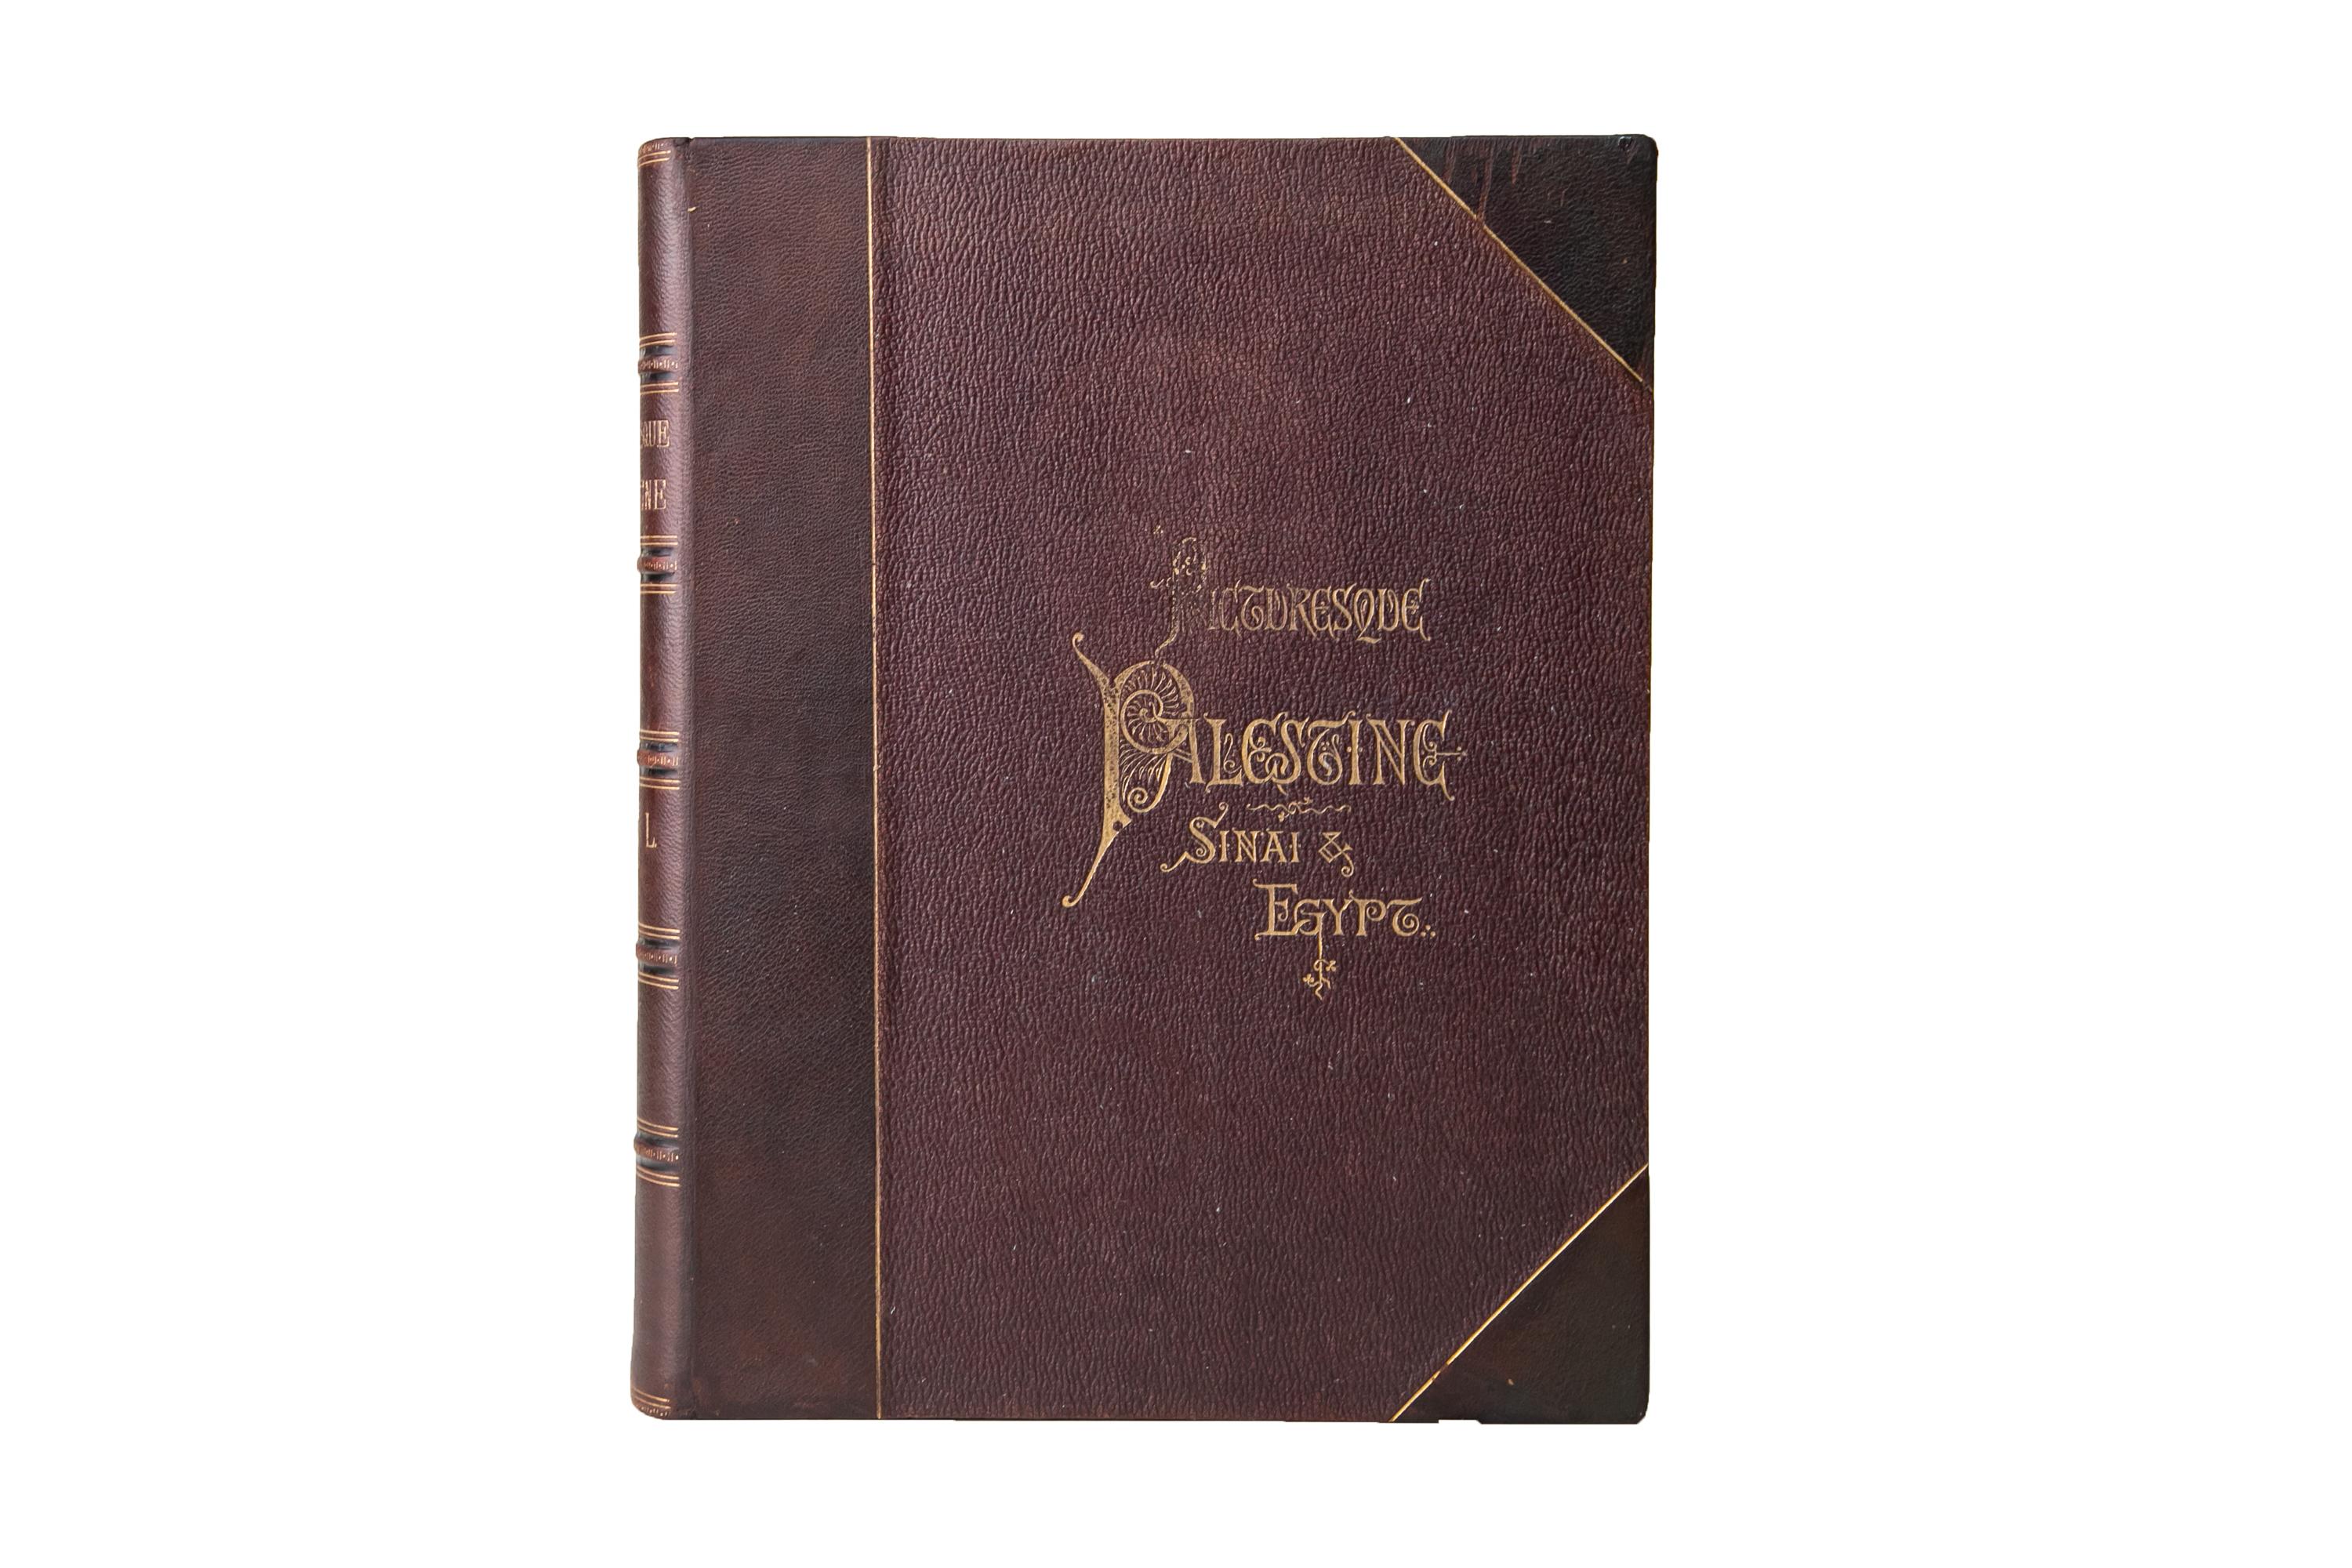 2 Volumes. Colonel Wilson, Picturesque Palestine, Sinai & Egypt. Bound in 3/4 brown morocco and linen boards with gilt-tooled borders and title lettering. The spines display raised bands, borders, and label lettering, all gilt-tooled. All of the